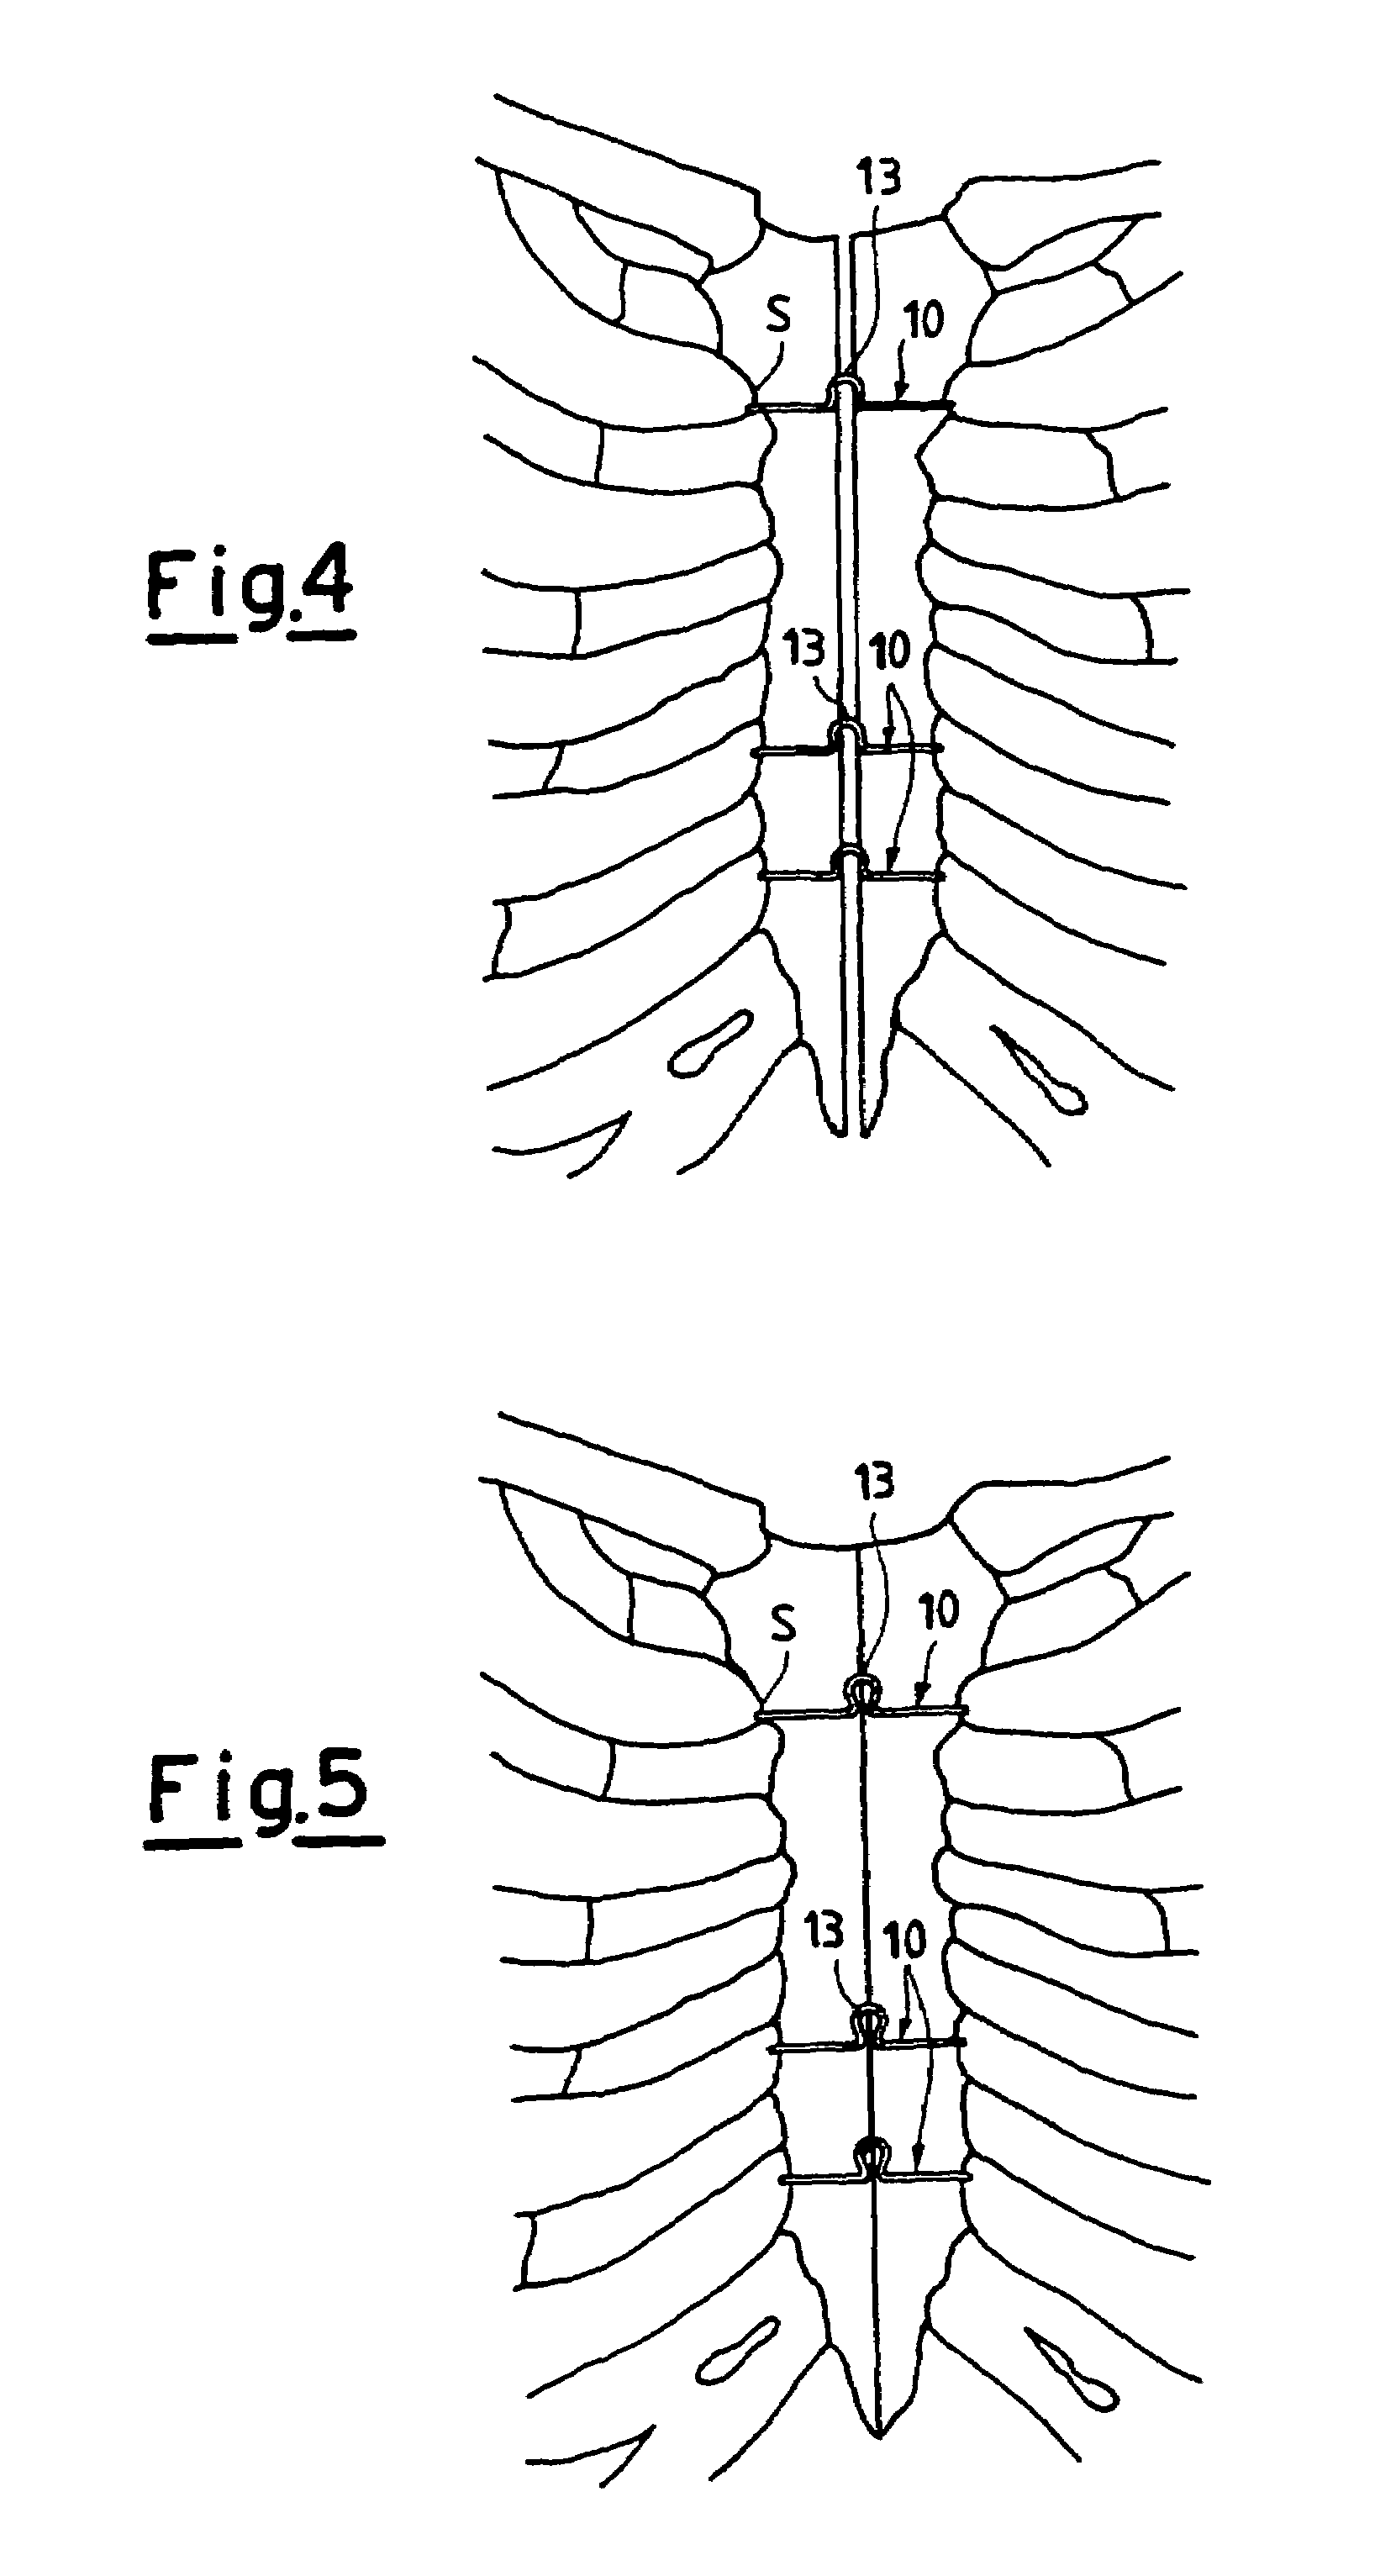 Semi-rigid compressive clamp for use in sternotomy, and forceps for its application